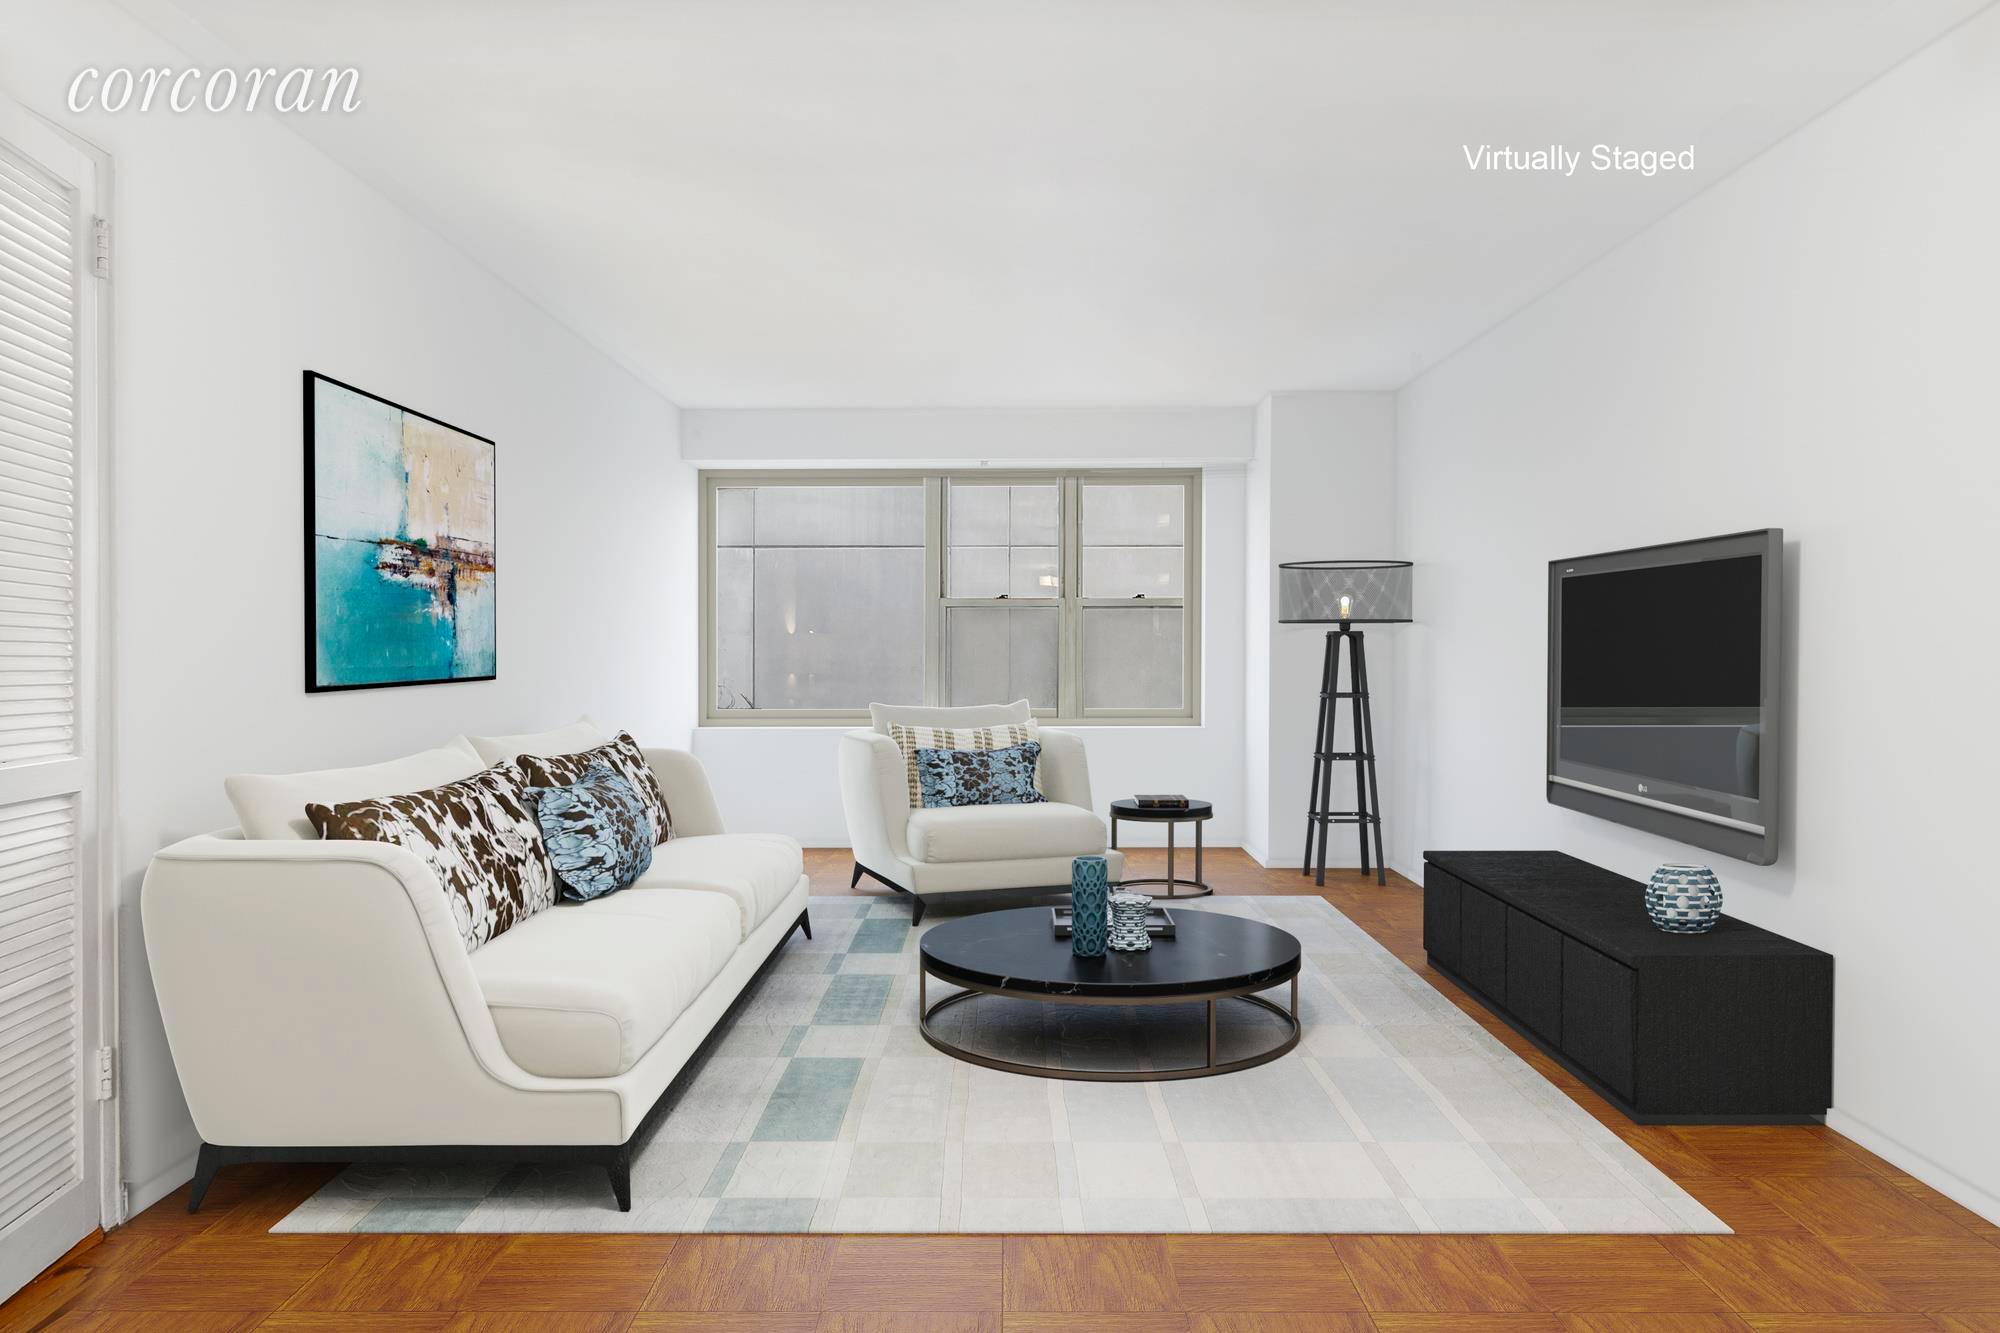 Welcome home to this sun filled south facing, gut renovated one bedroom apartment situated a block from the Q train and the best restaurants in the Upper East Side !